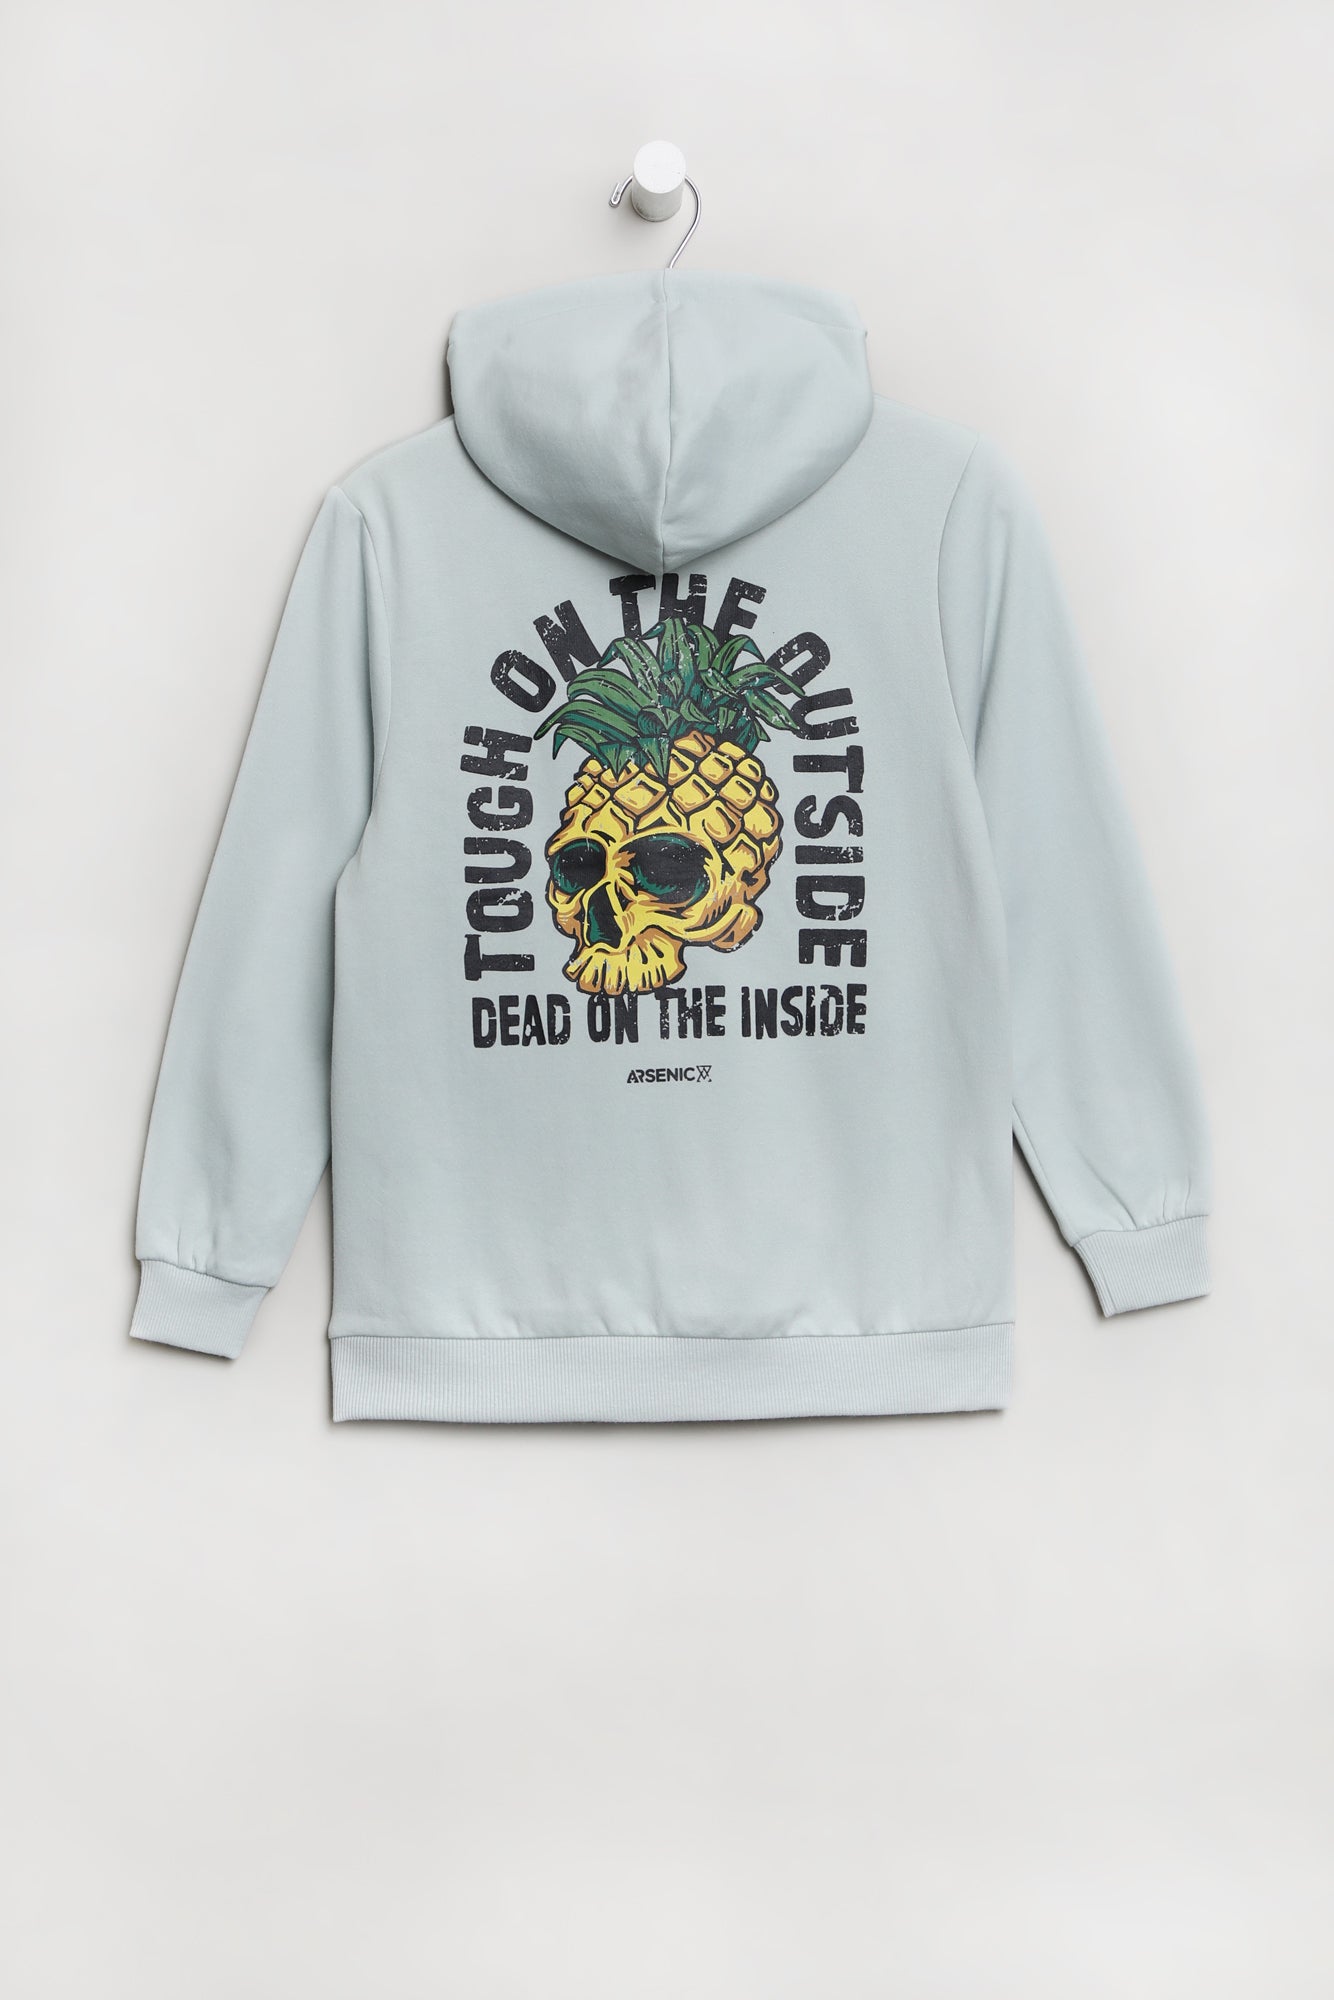 Arsenic Youth Tough On the Outside Hoodie - Sage /